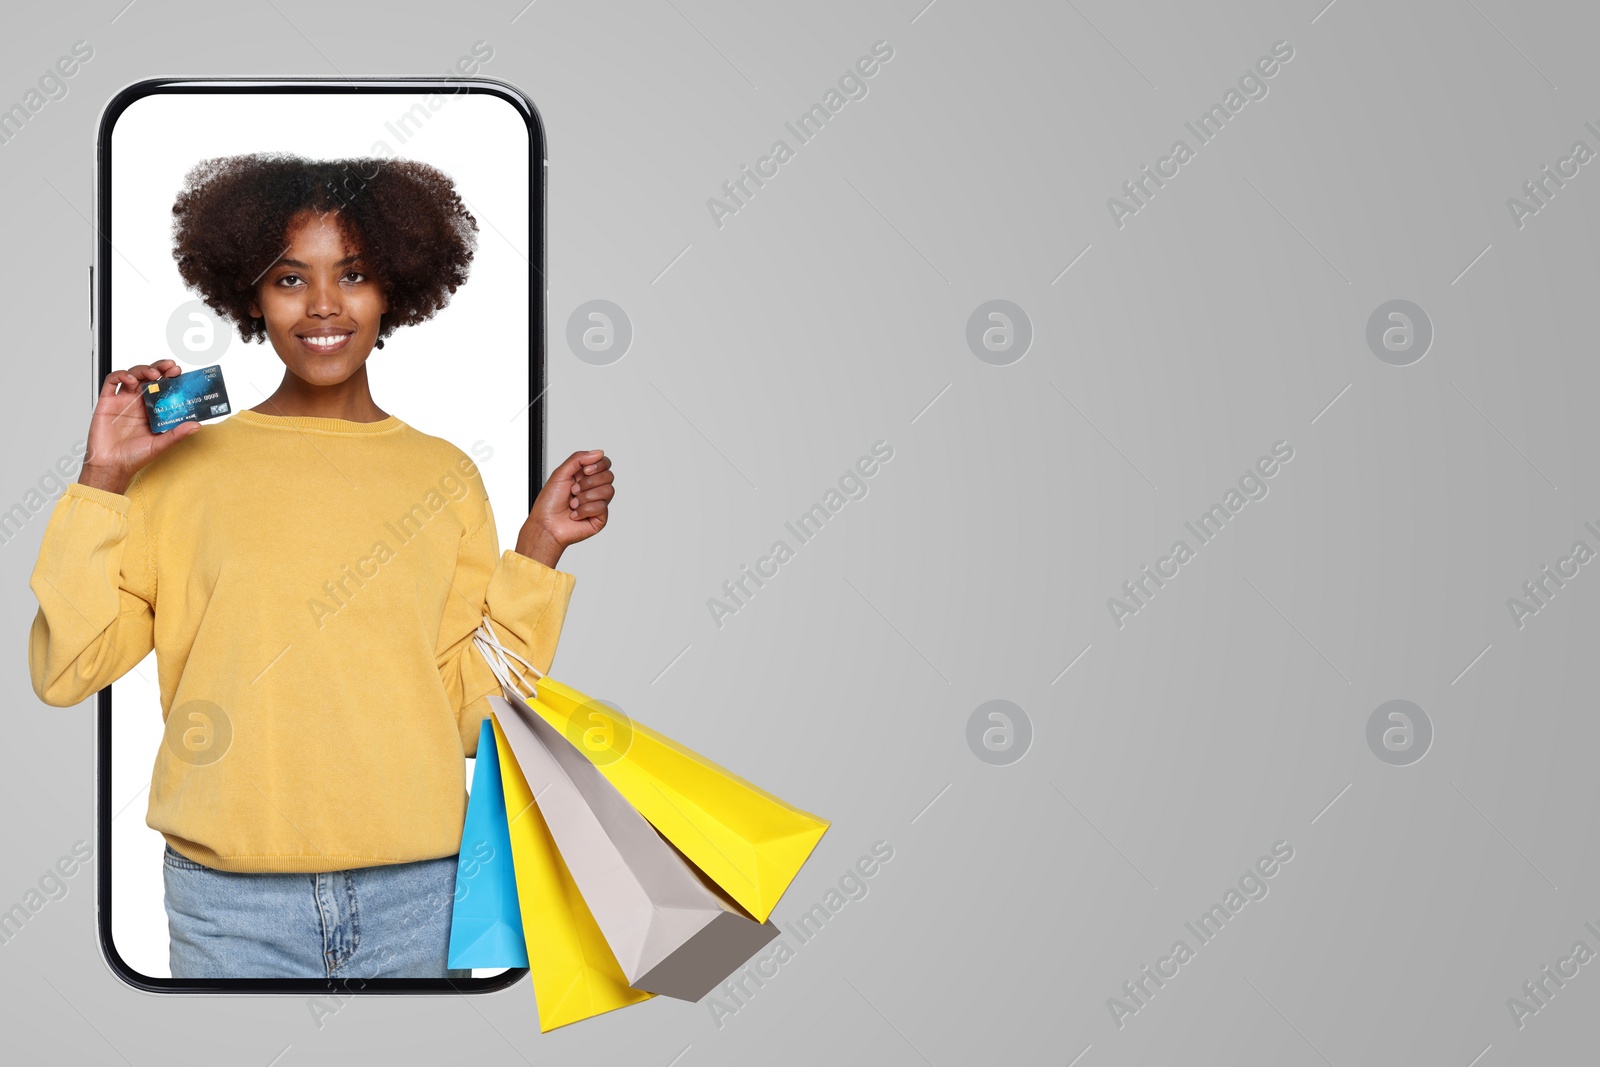 Image of Online shopping. Happy woman with paper bags and credit card looking out from smartphone on gray background, space for text